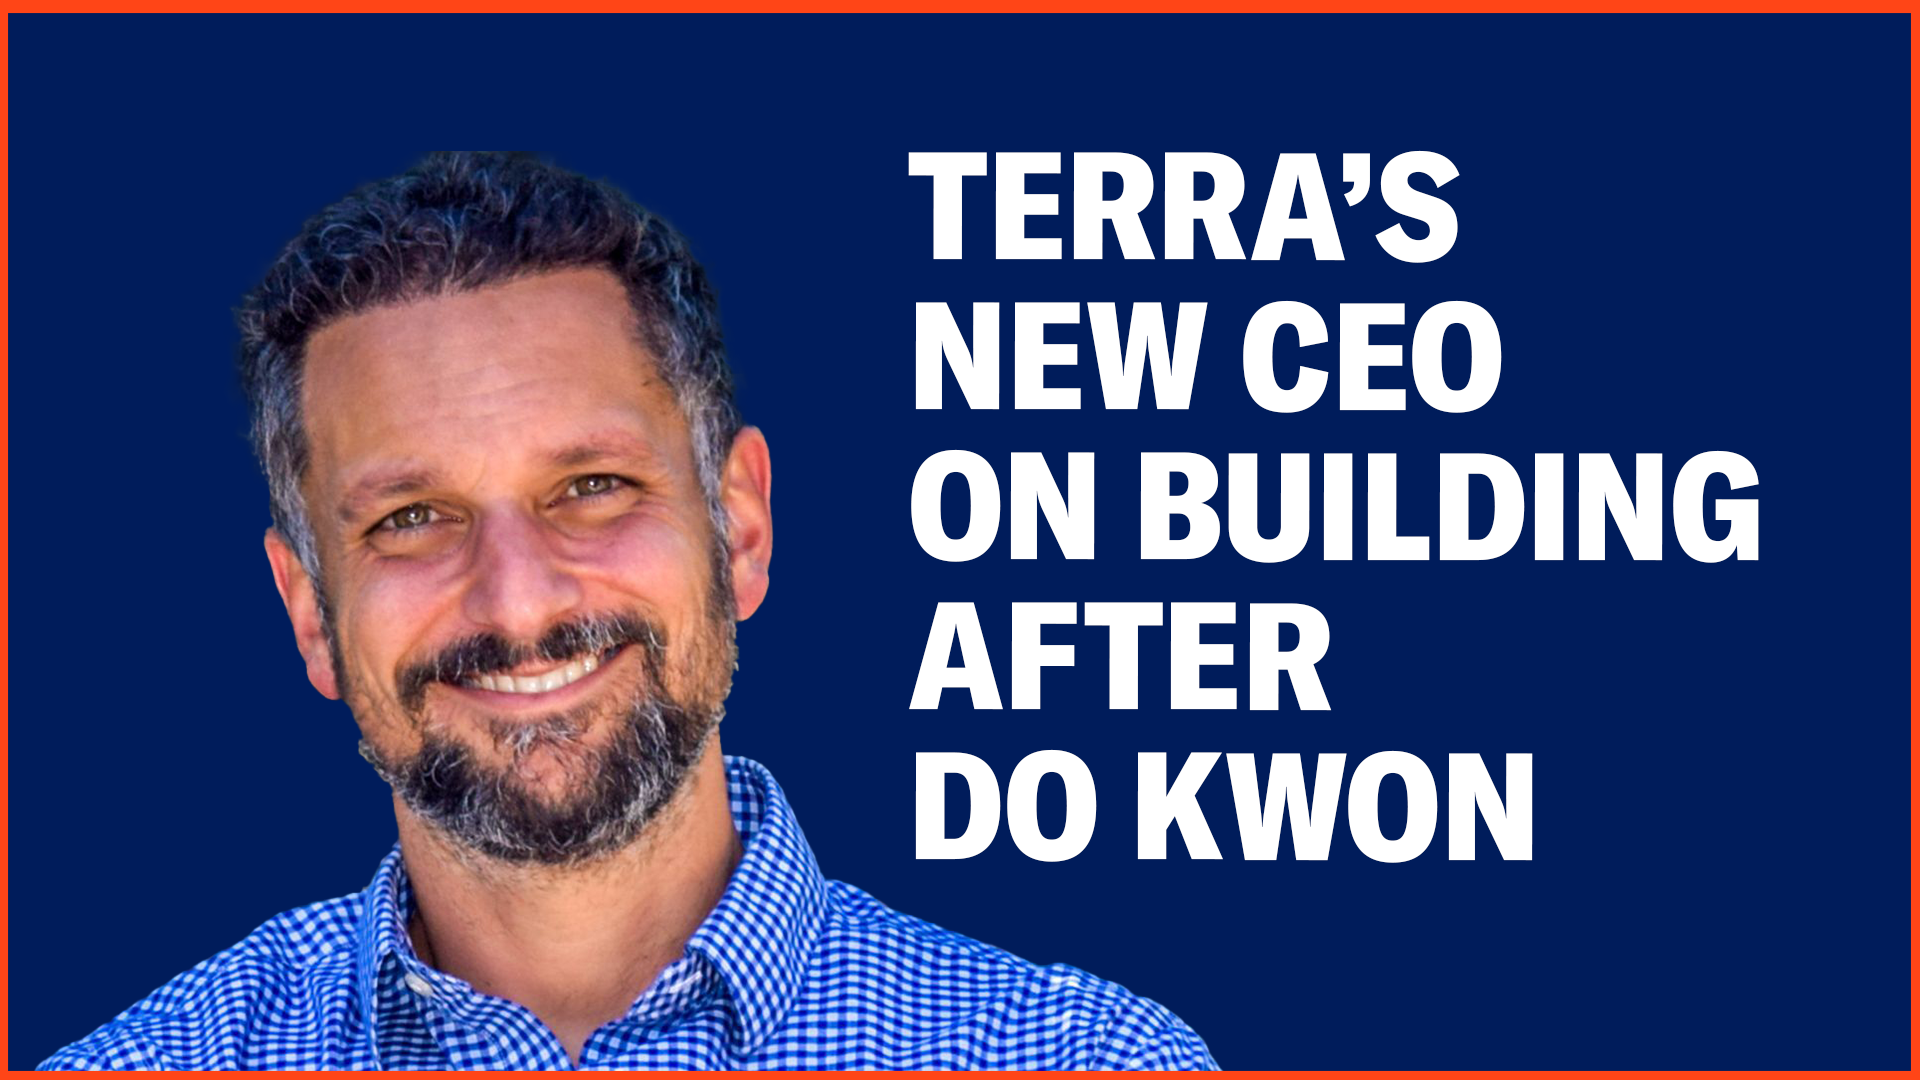 New Terra CEO Chris Amani was in the company's war room during the historic collapse. Now, he says he's leading the company into a new era based on real utility.